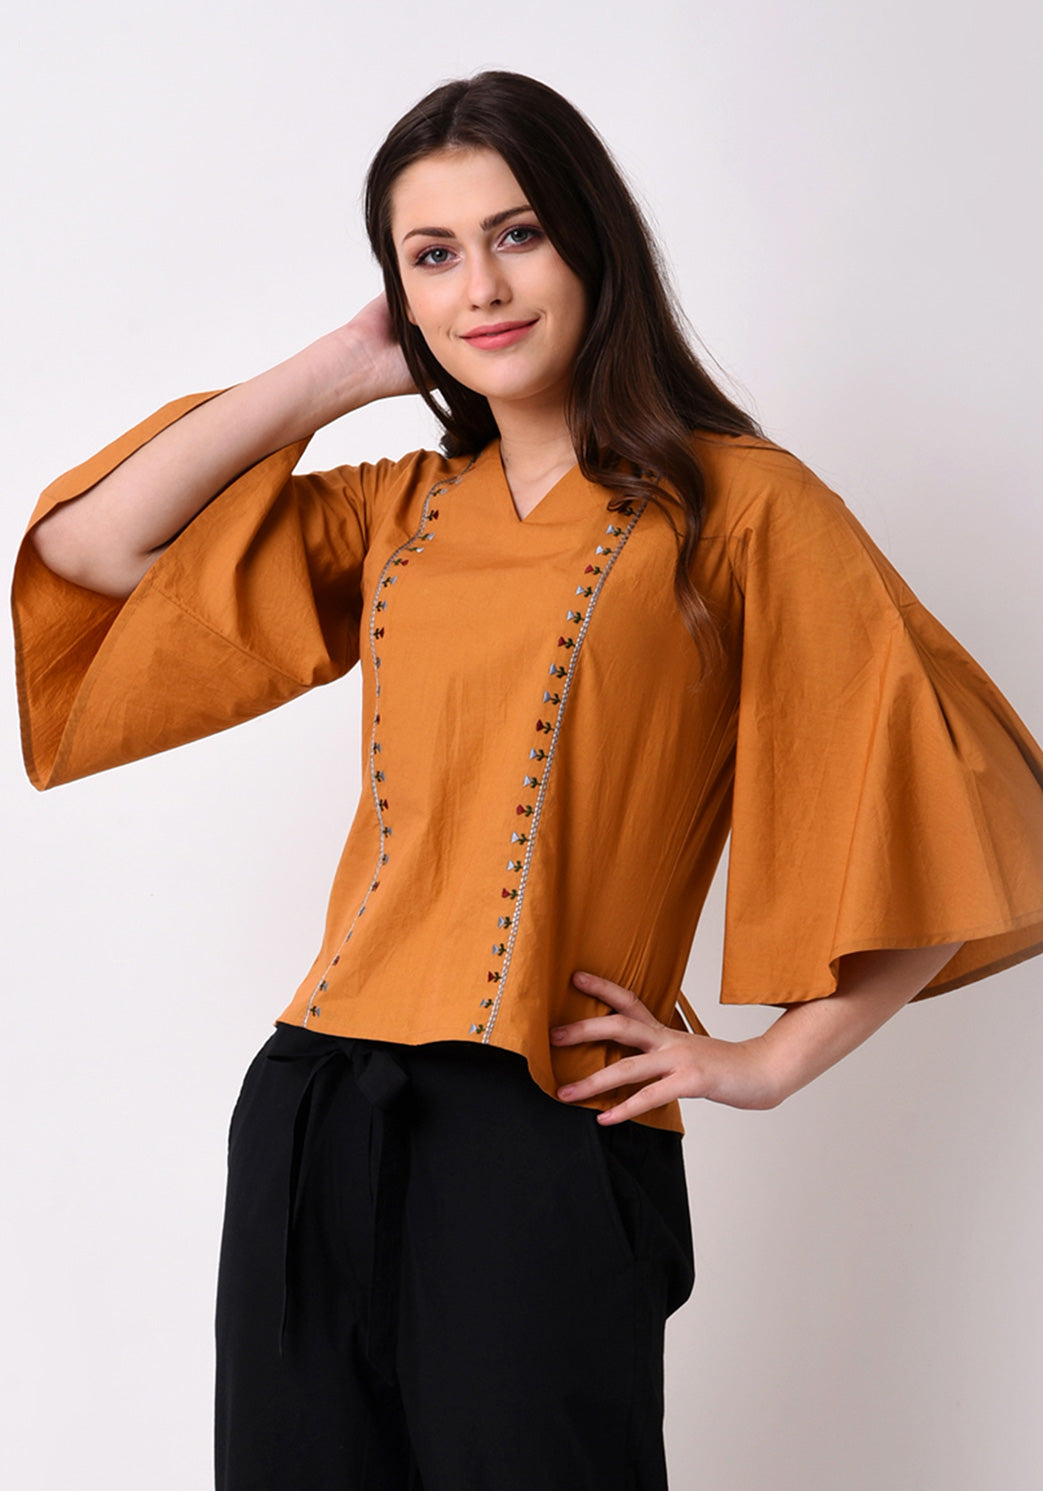 Tribal Embroidered Top - Mustard